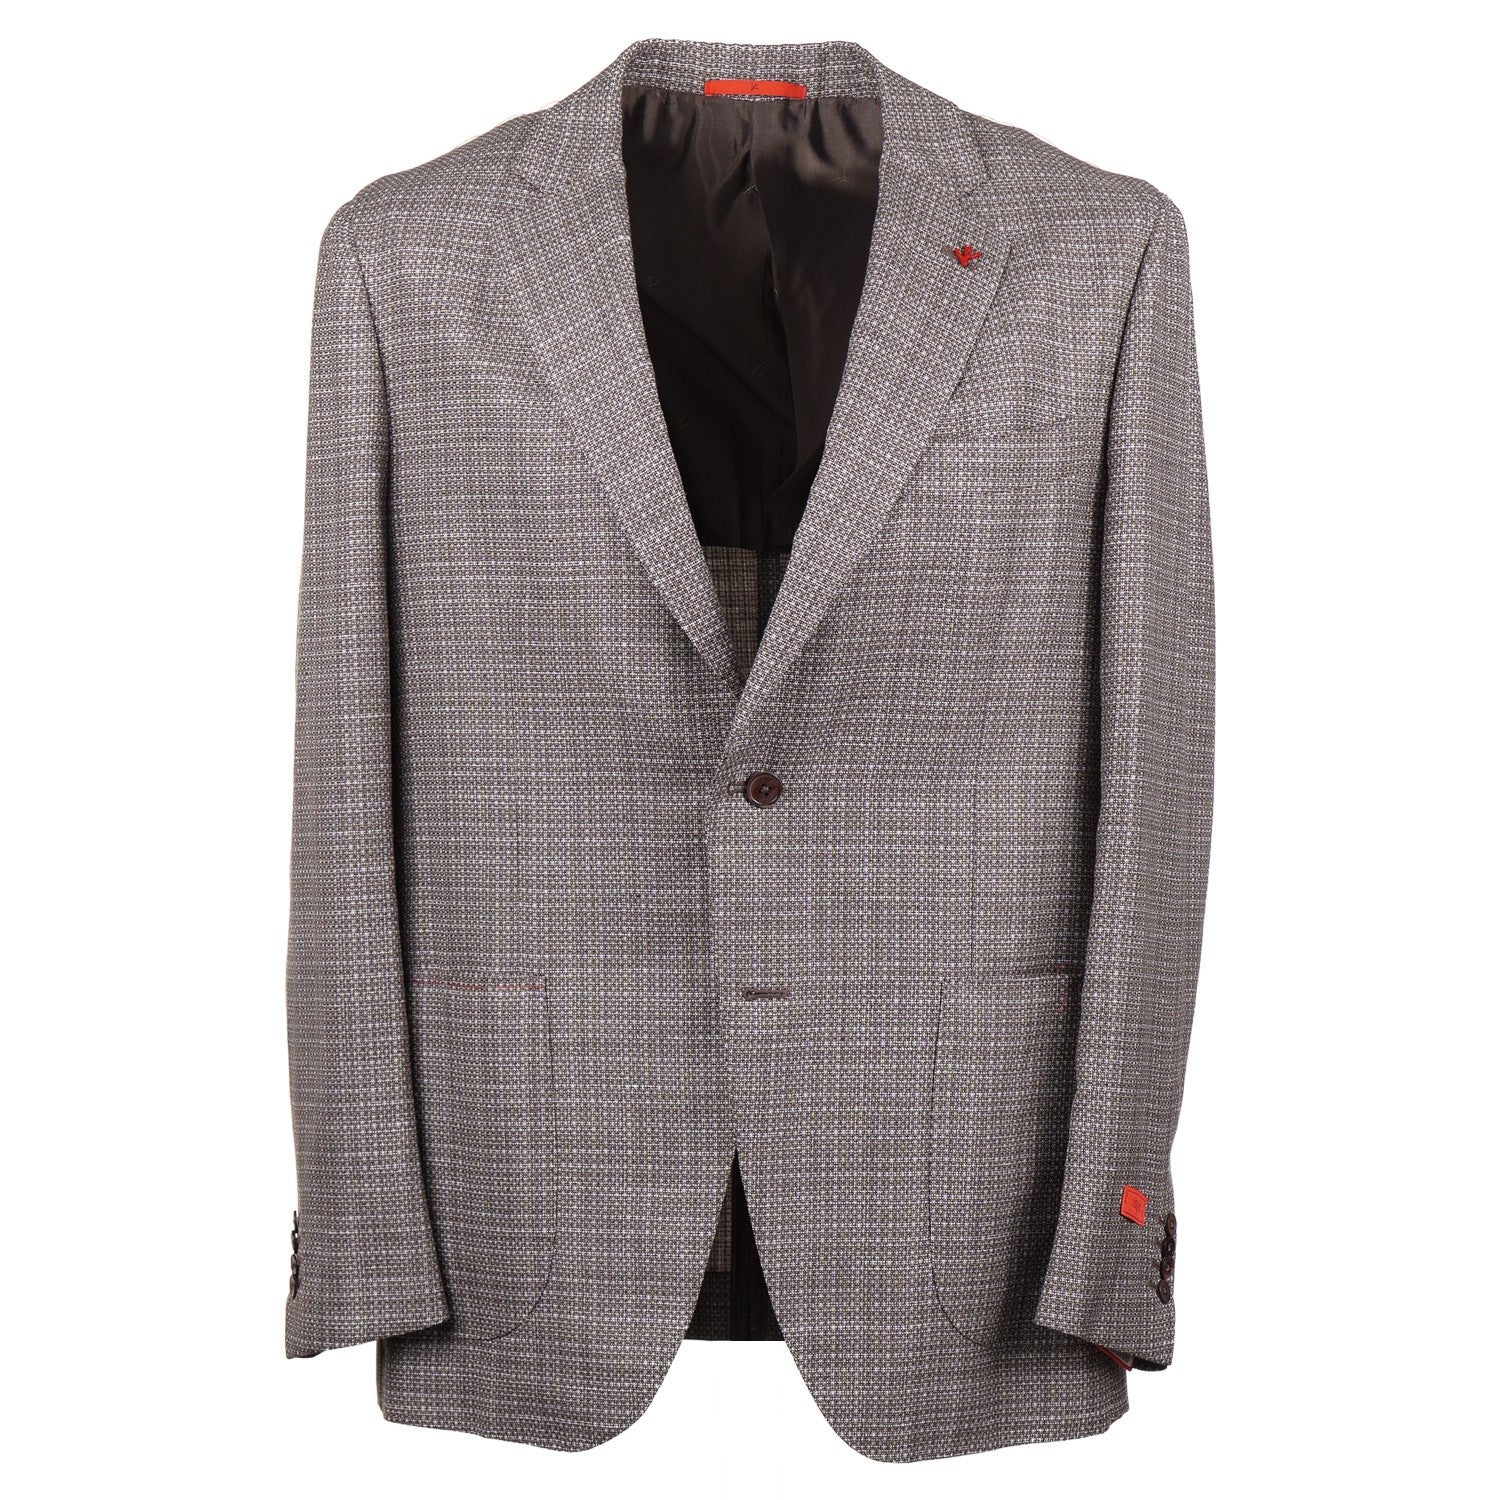 Isaia Slim-Fit Wool and Linen Sport Coat - Top Shelf Apparel